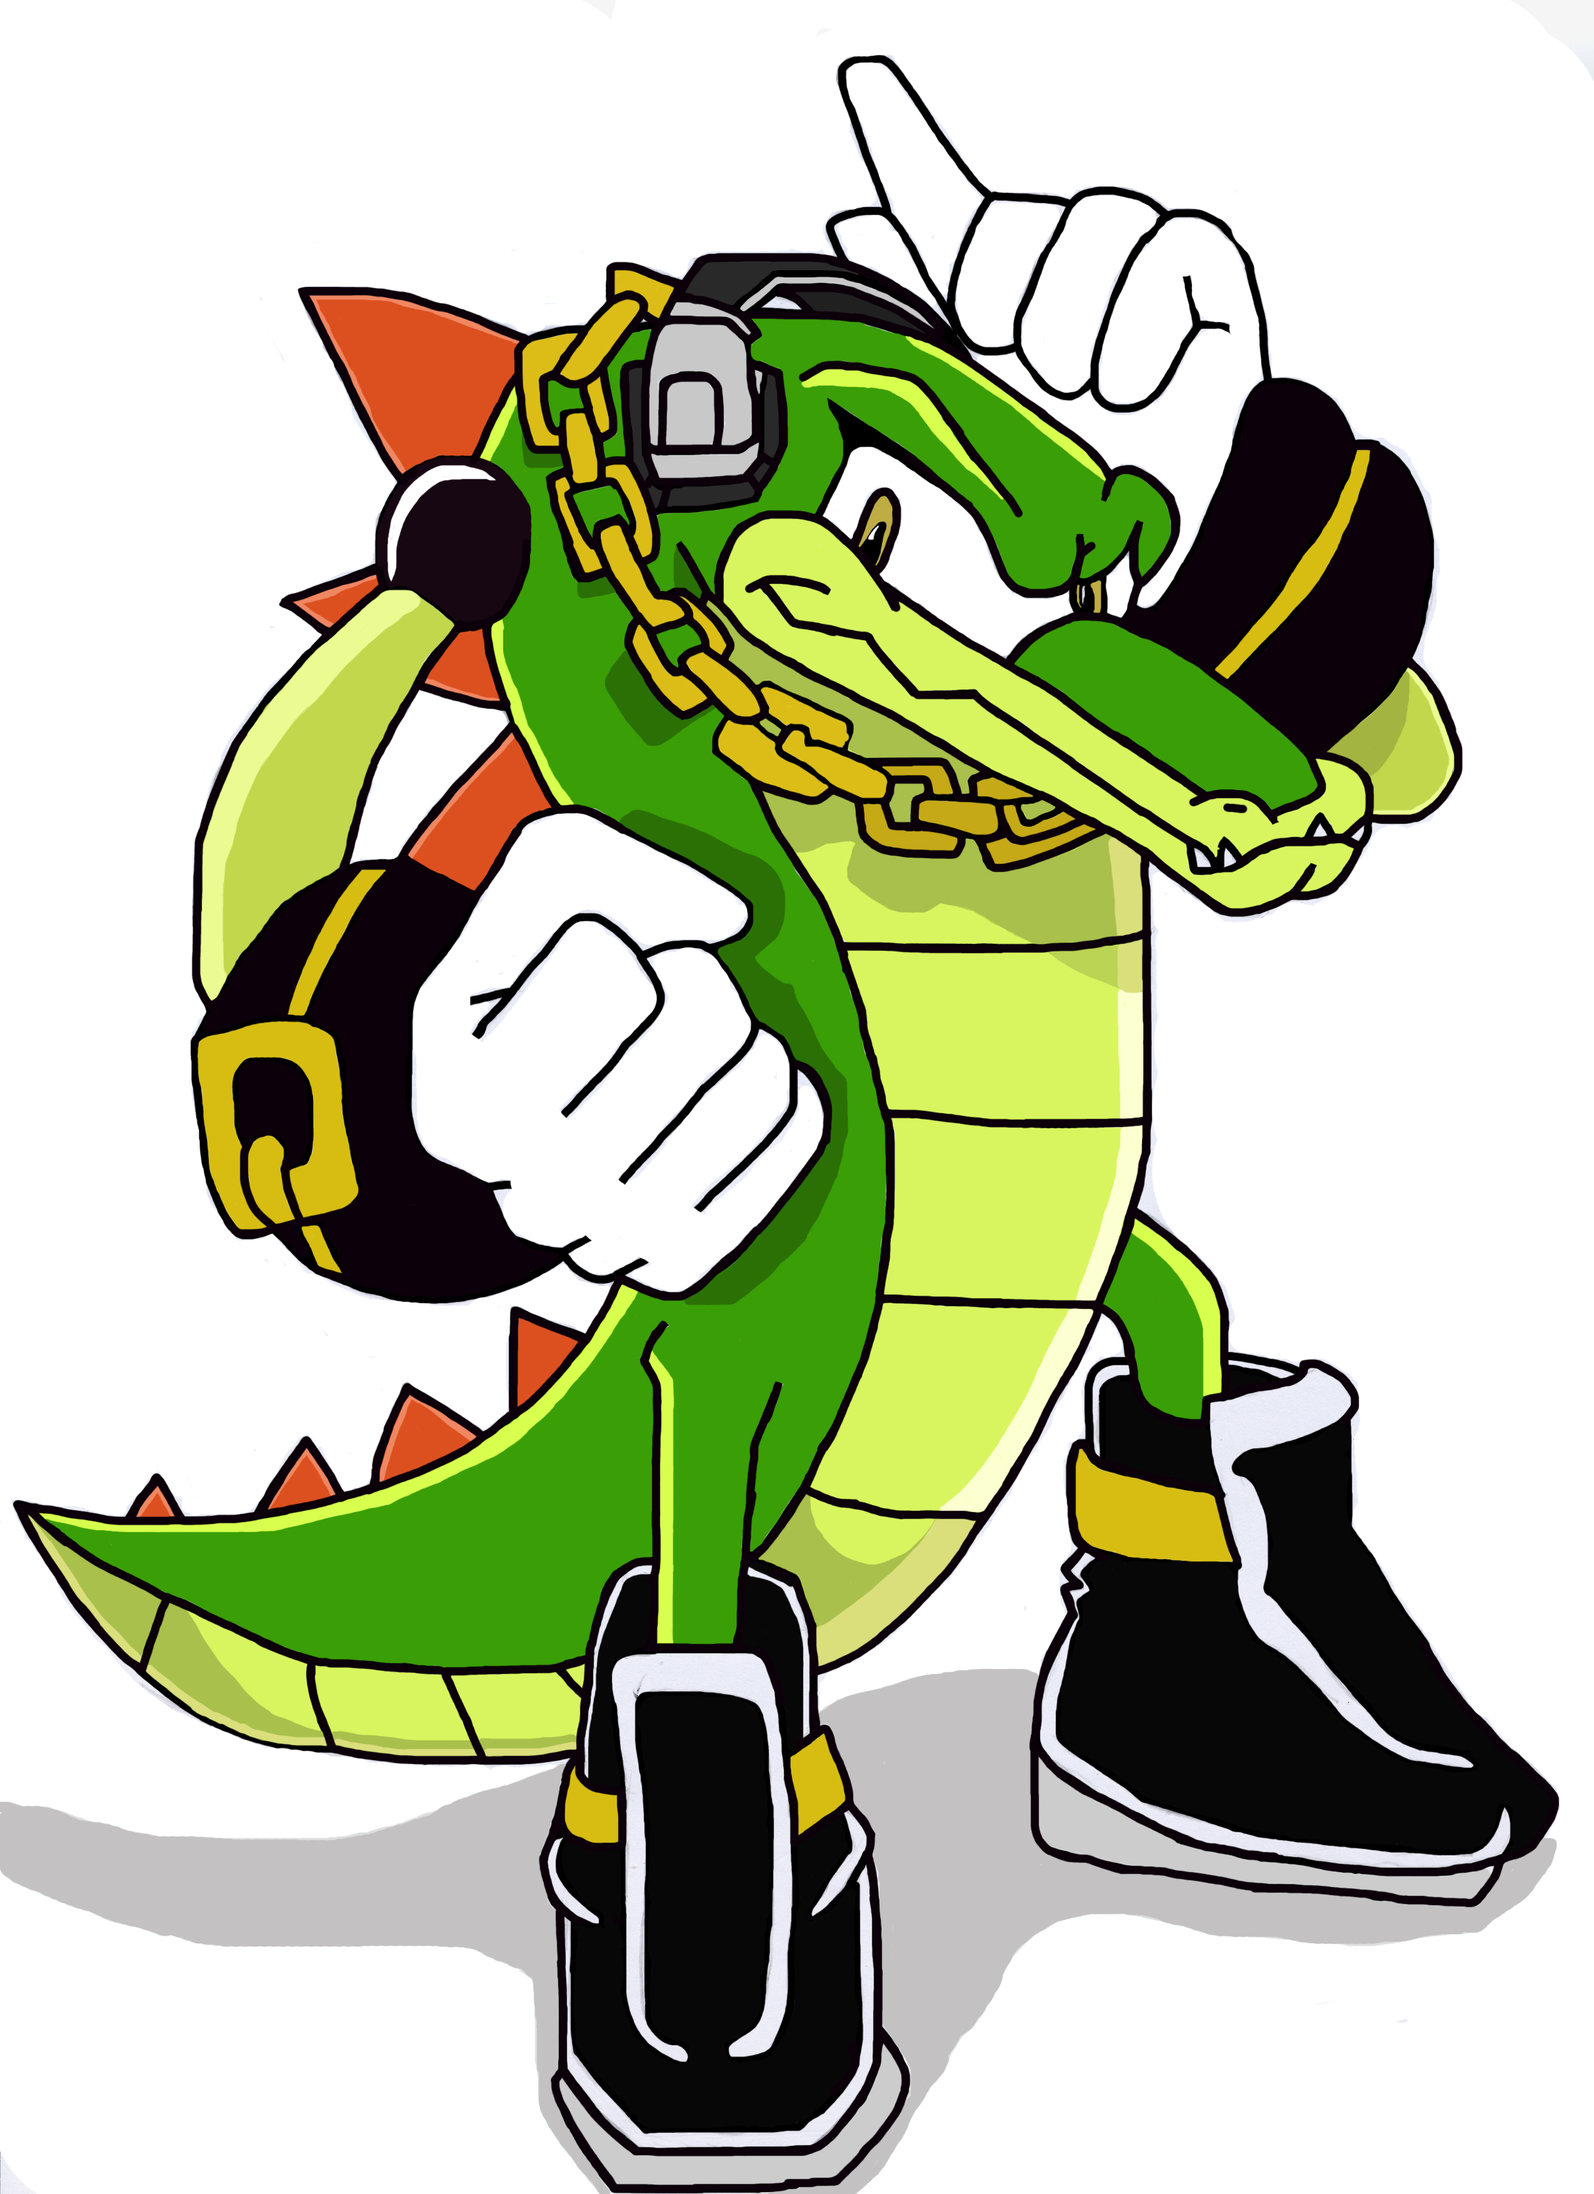 Human Vector The Crocodile Image Pictures Becuo